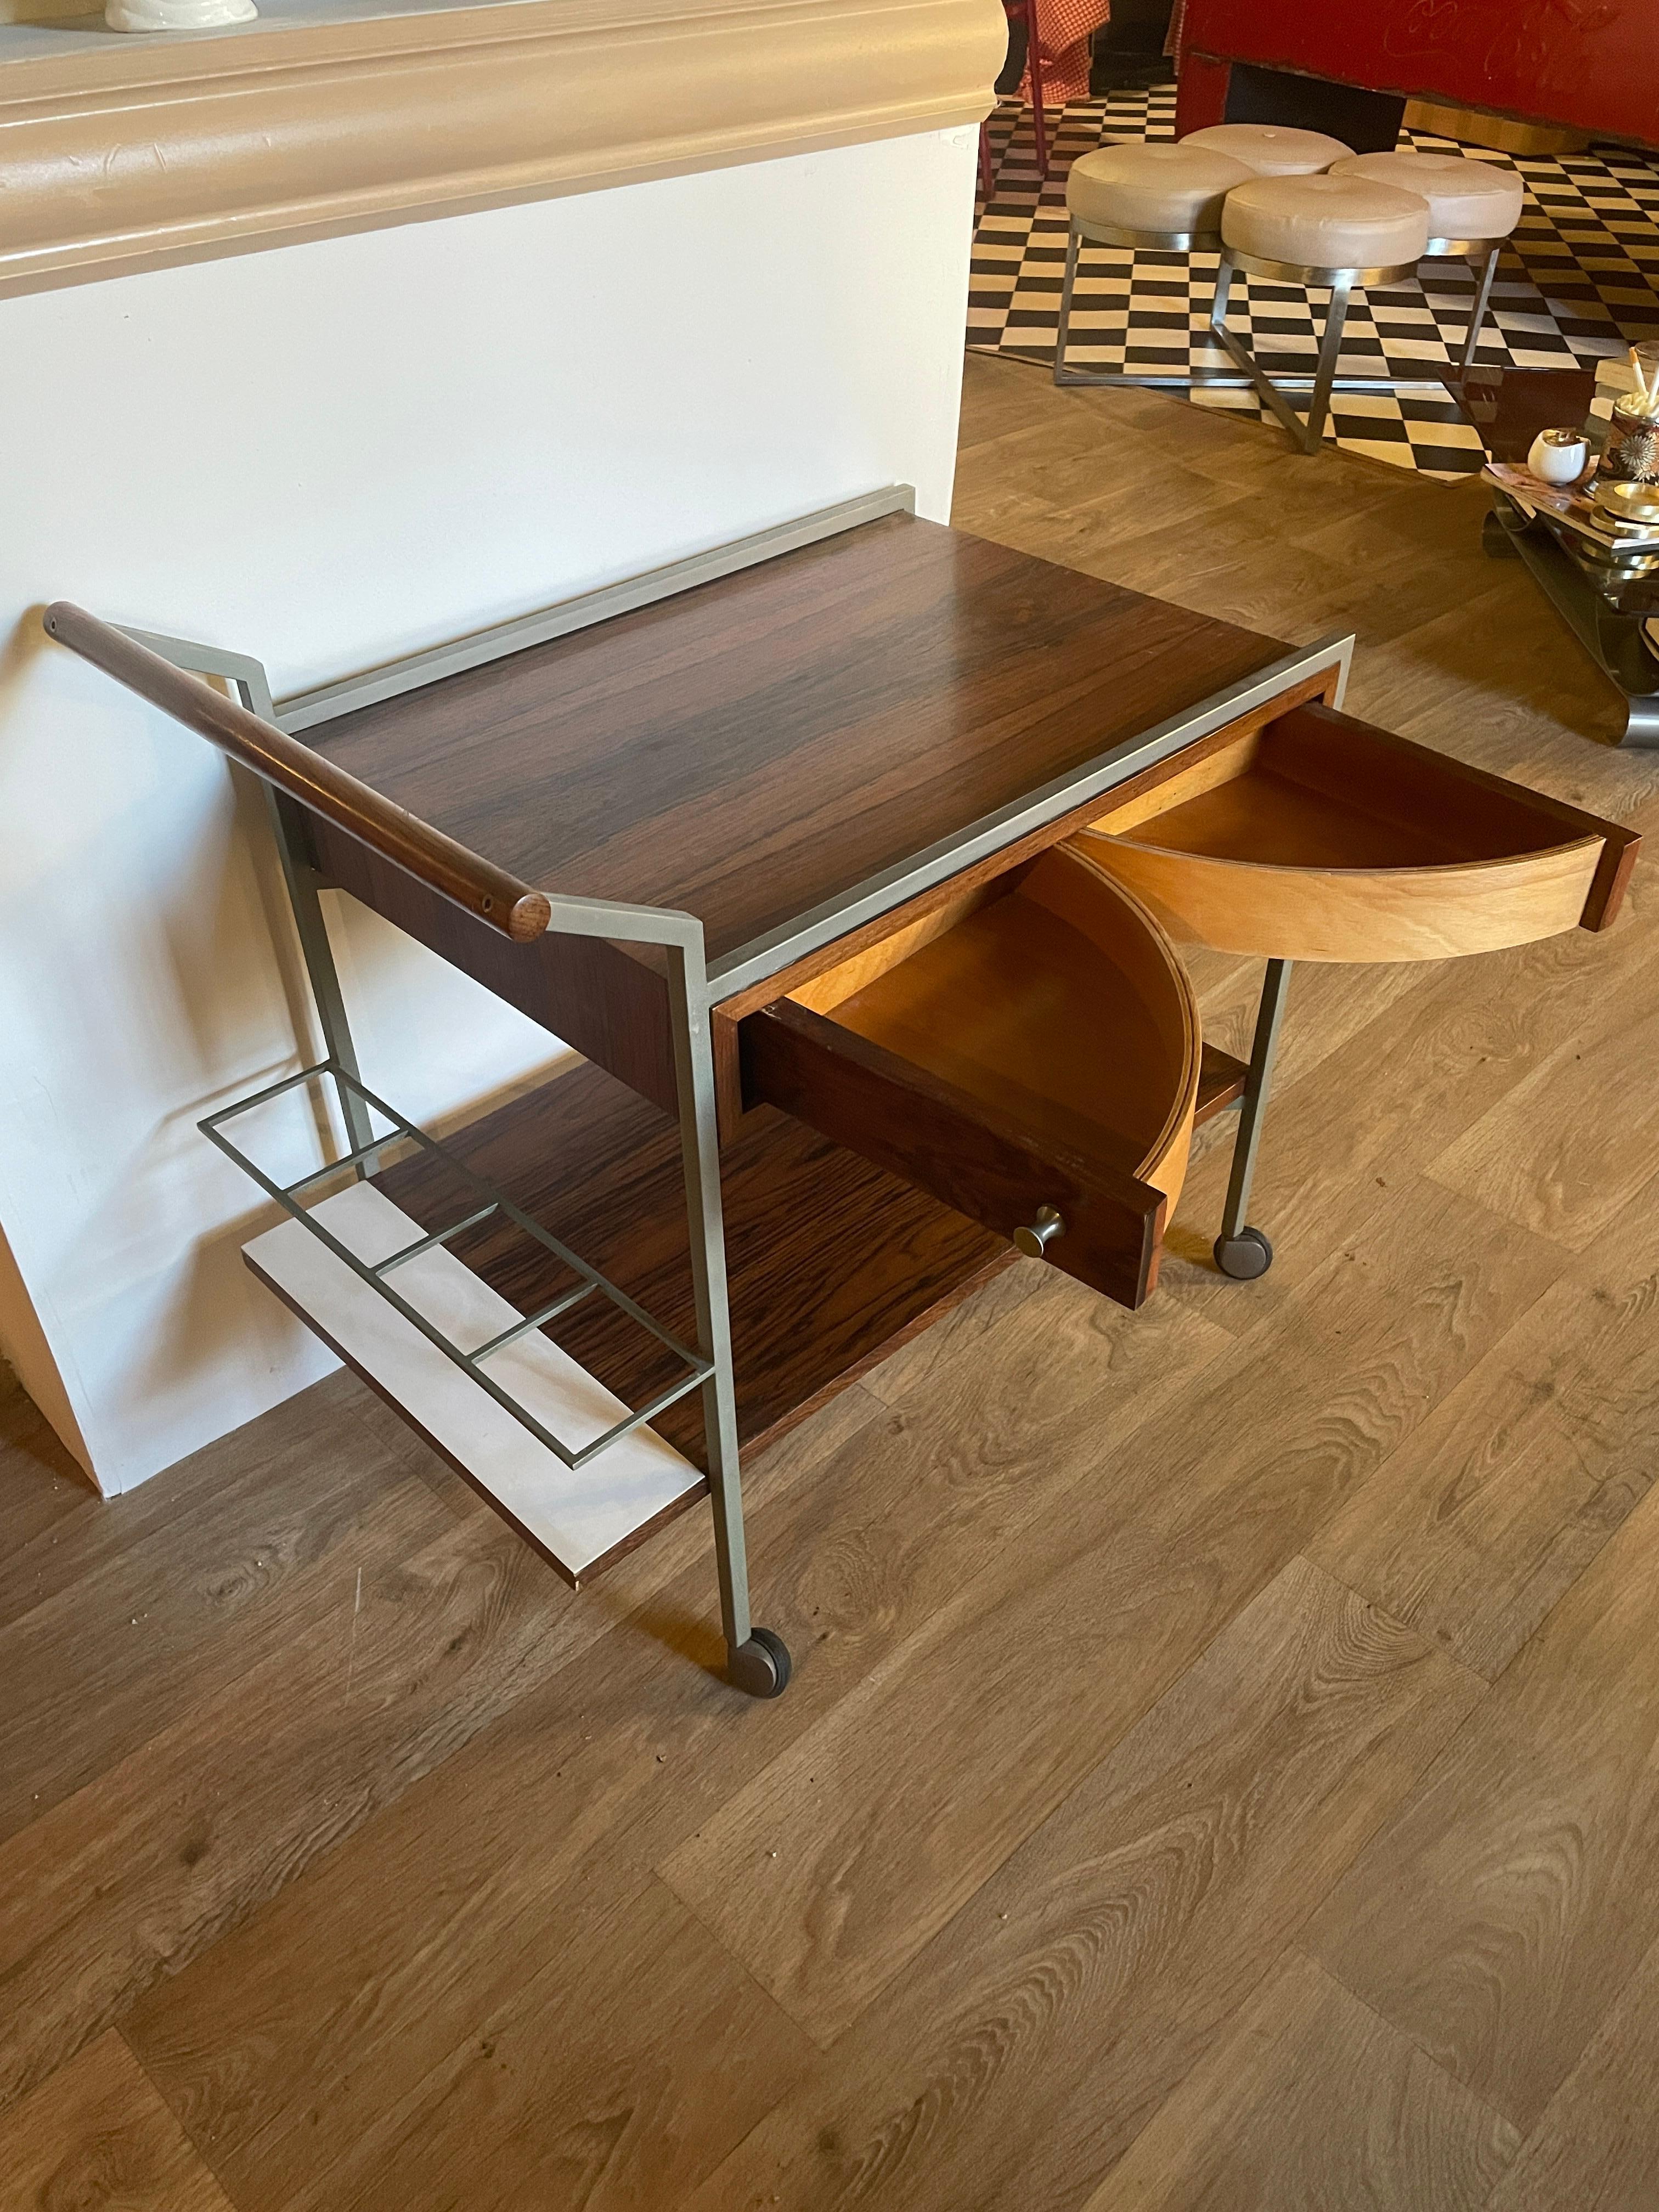 20th Century Serving Table Trolley by George Nelson Bar Cocktail 1960 Wood & Steel MidCentury